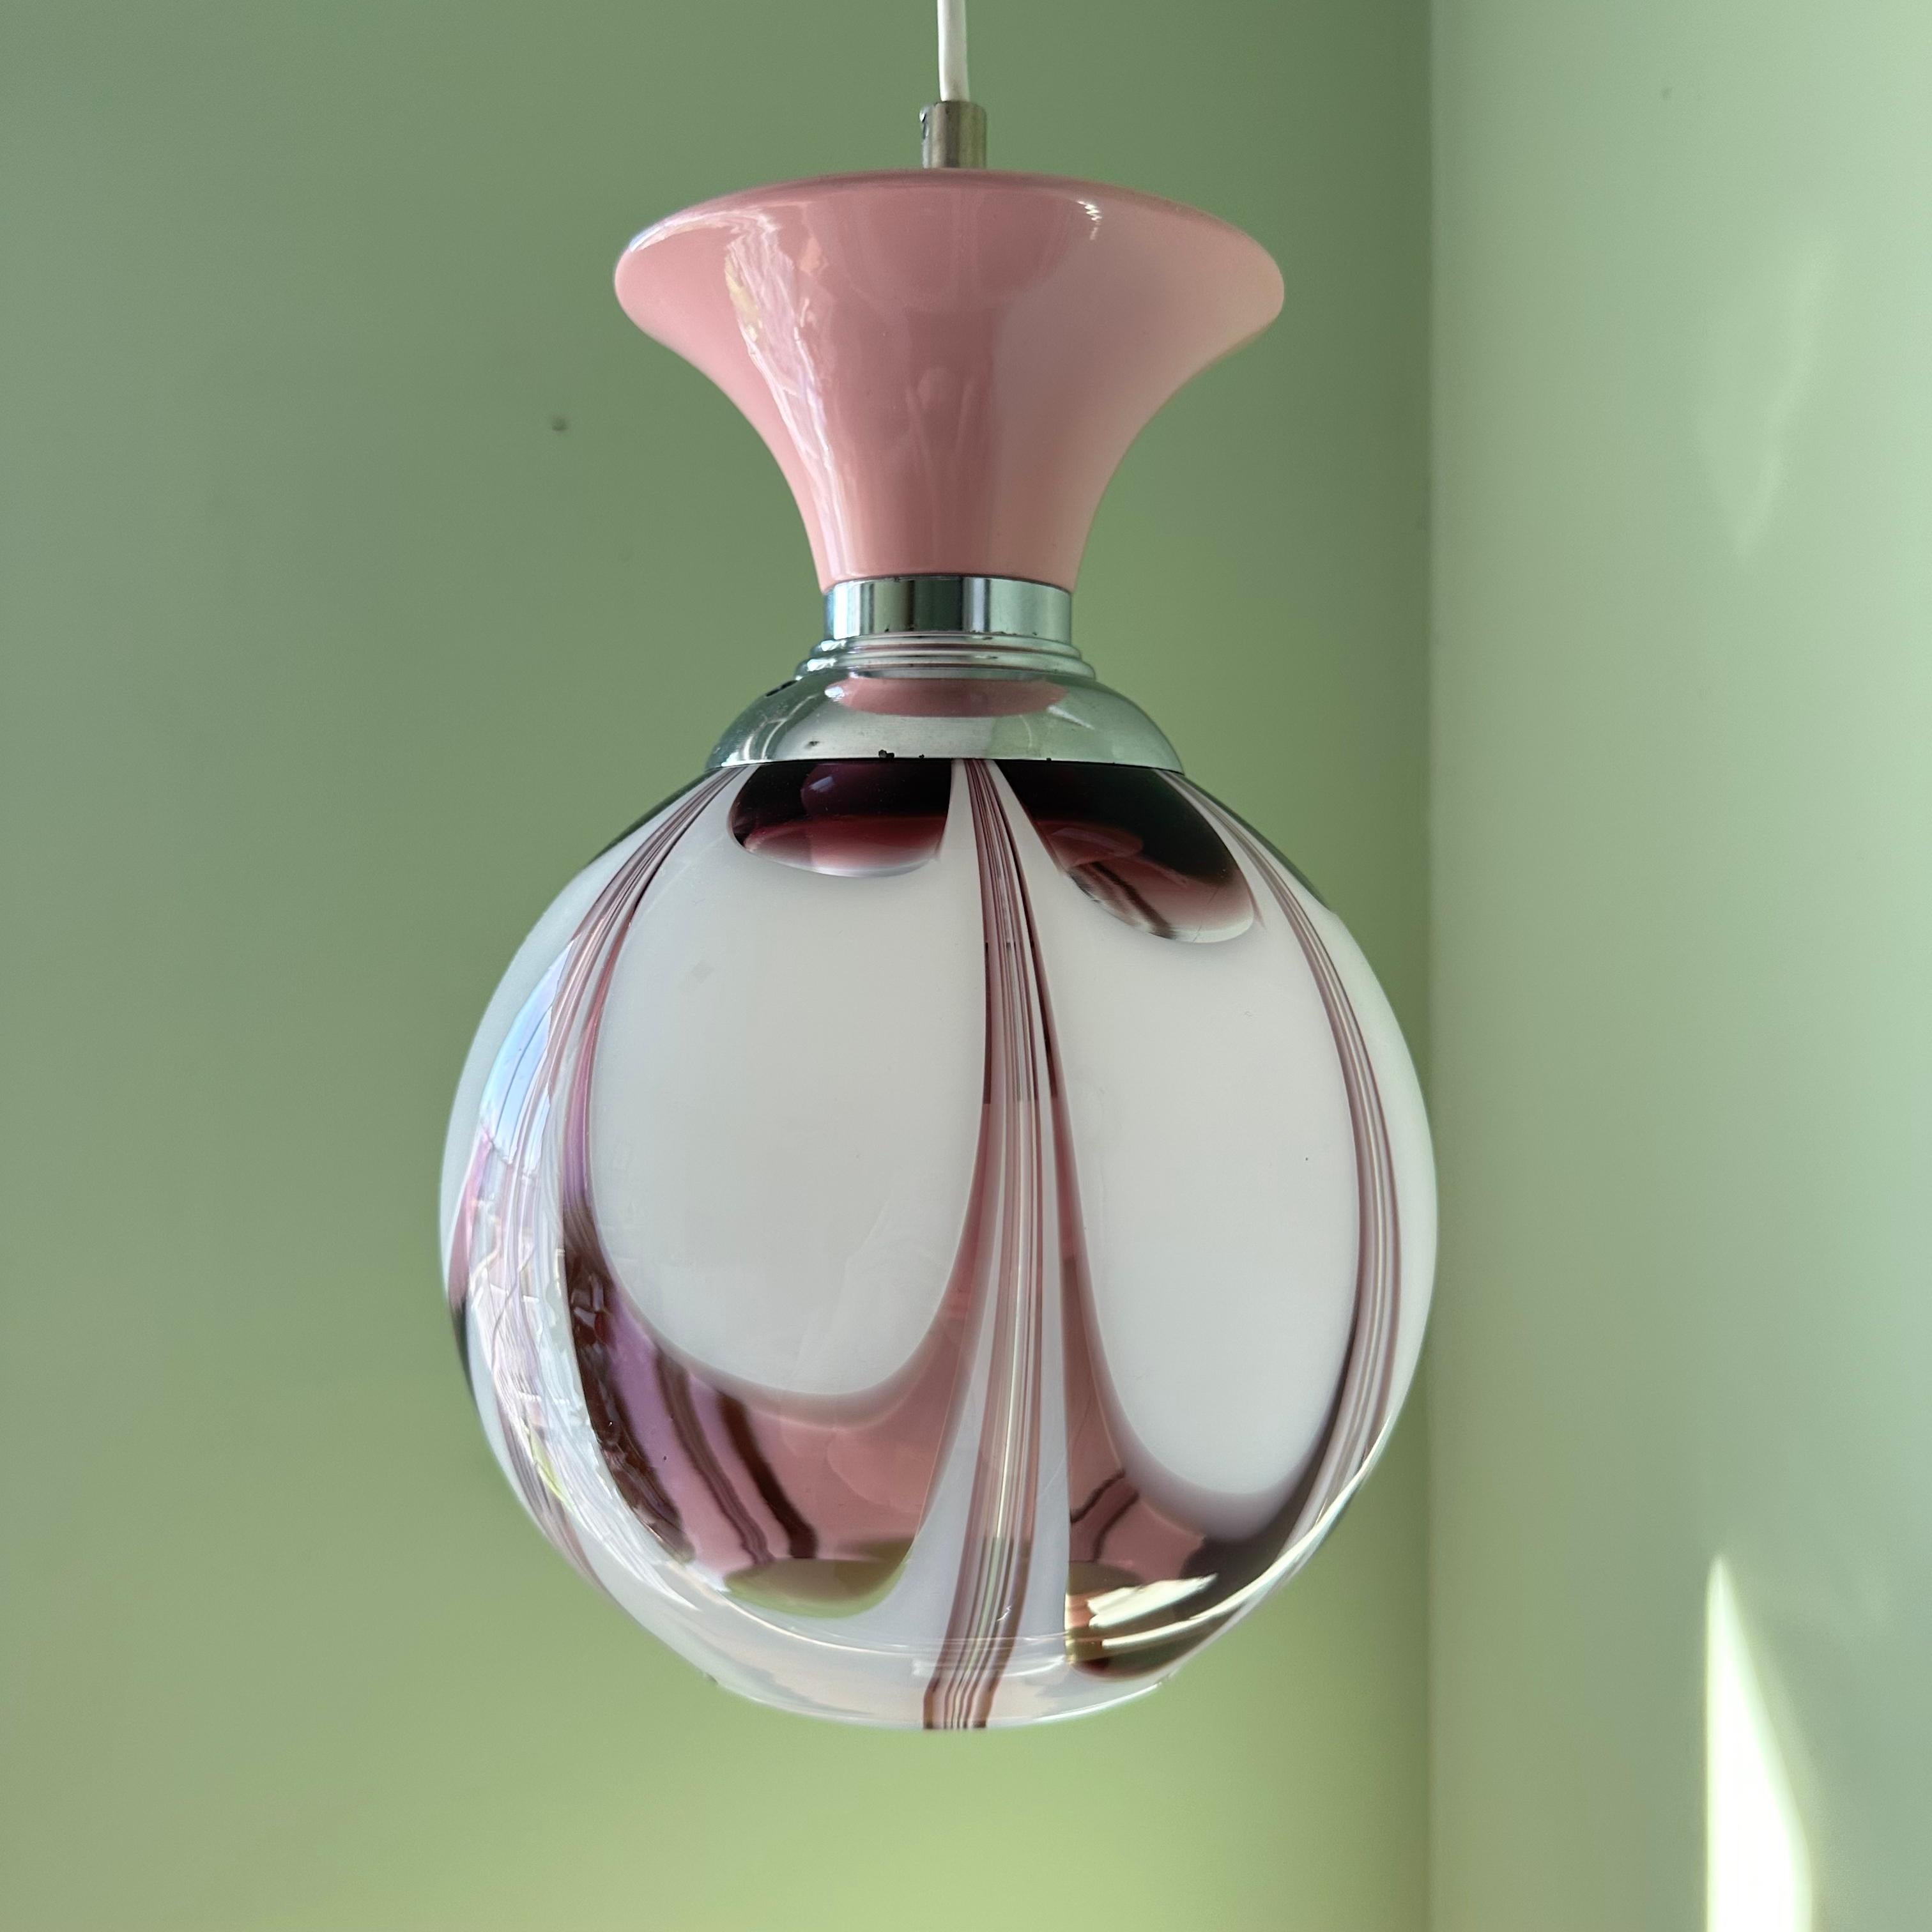 An absolutely beautiful mid century modern vintage Murano blown glass ceiling pendant light in a swirl of amethyst purple and milky white. Capped with additional details in pink and chrome, this feminine fixture was made in Italy. The swirling,